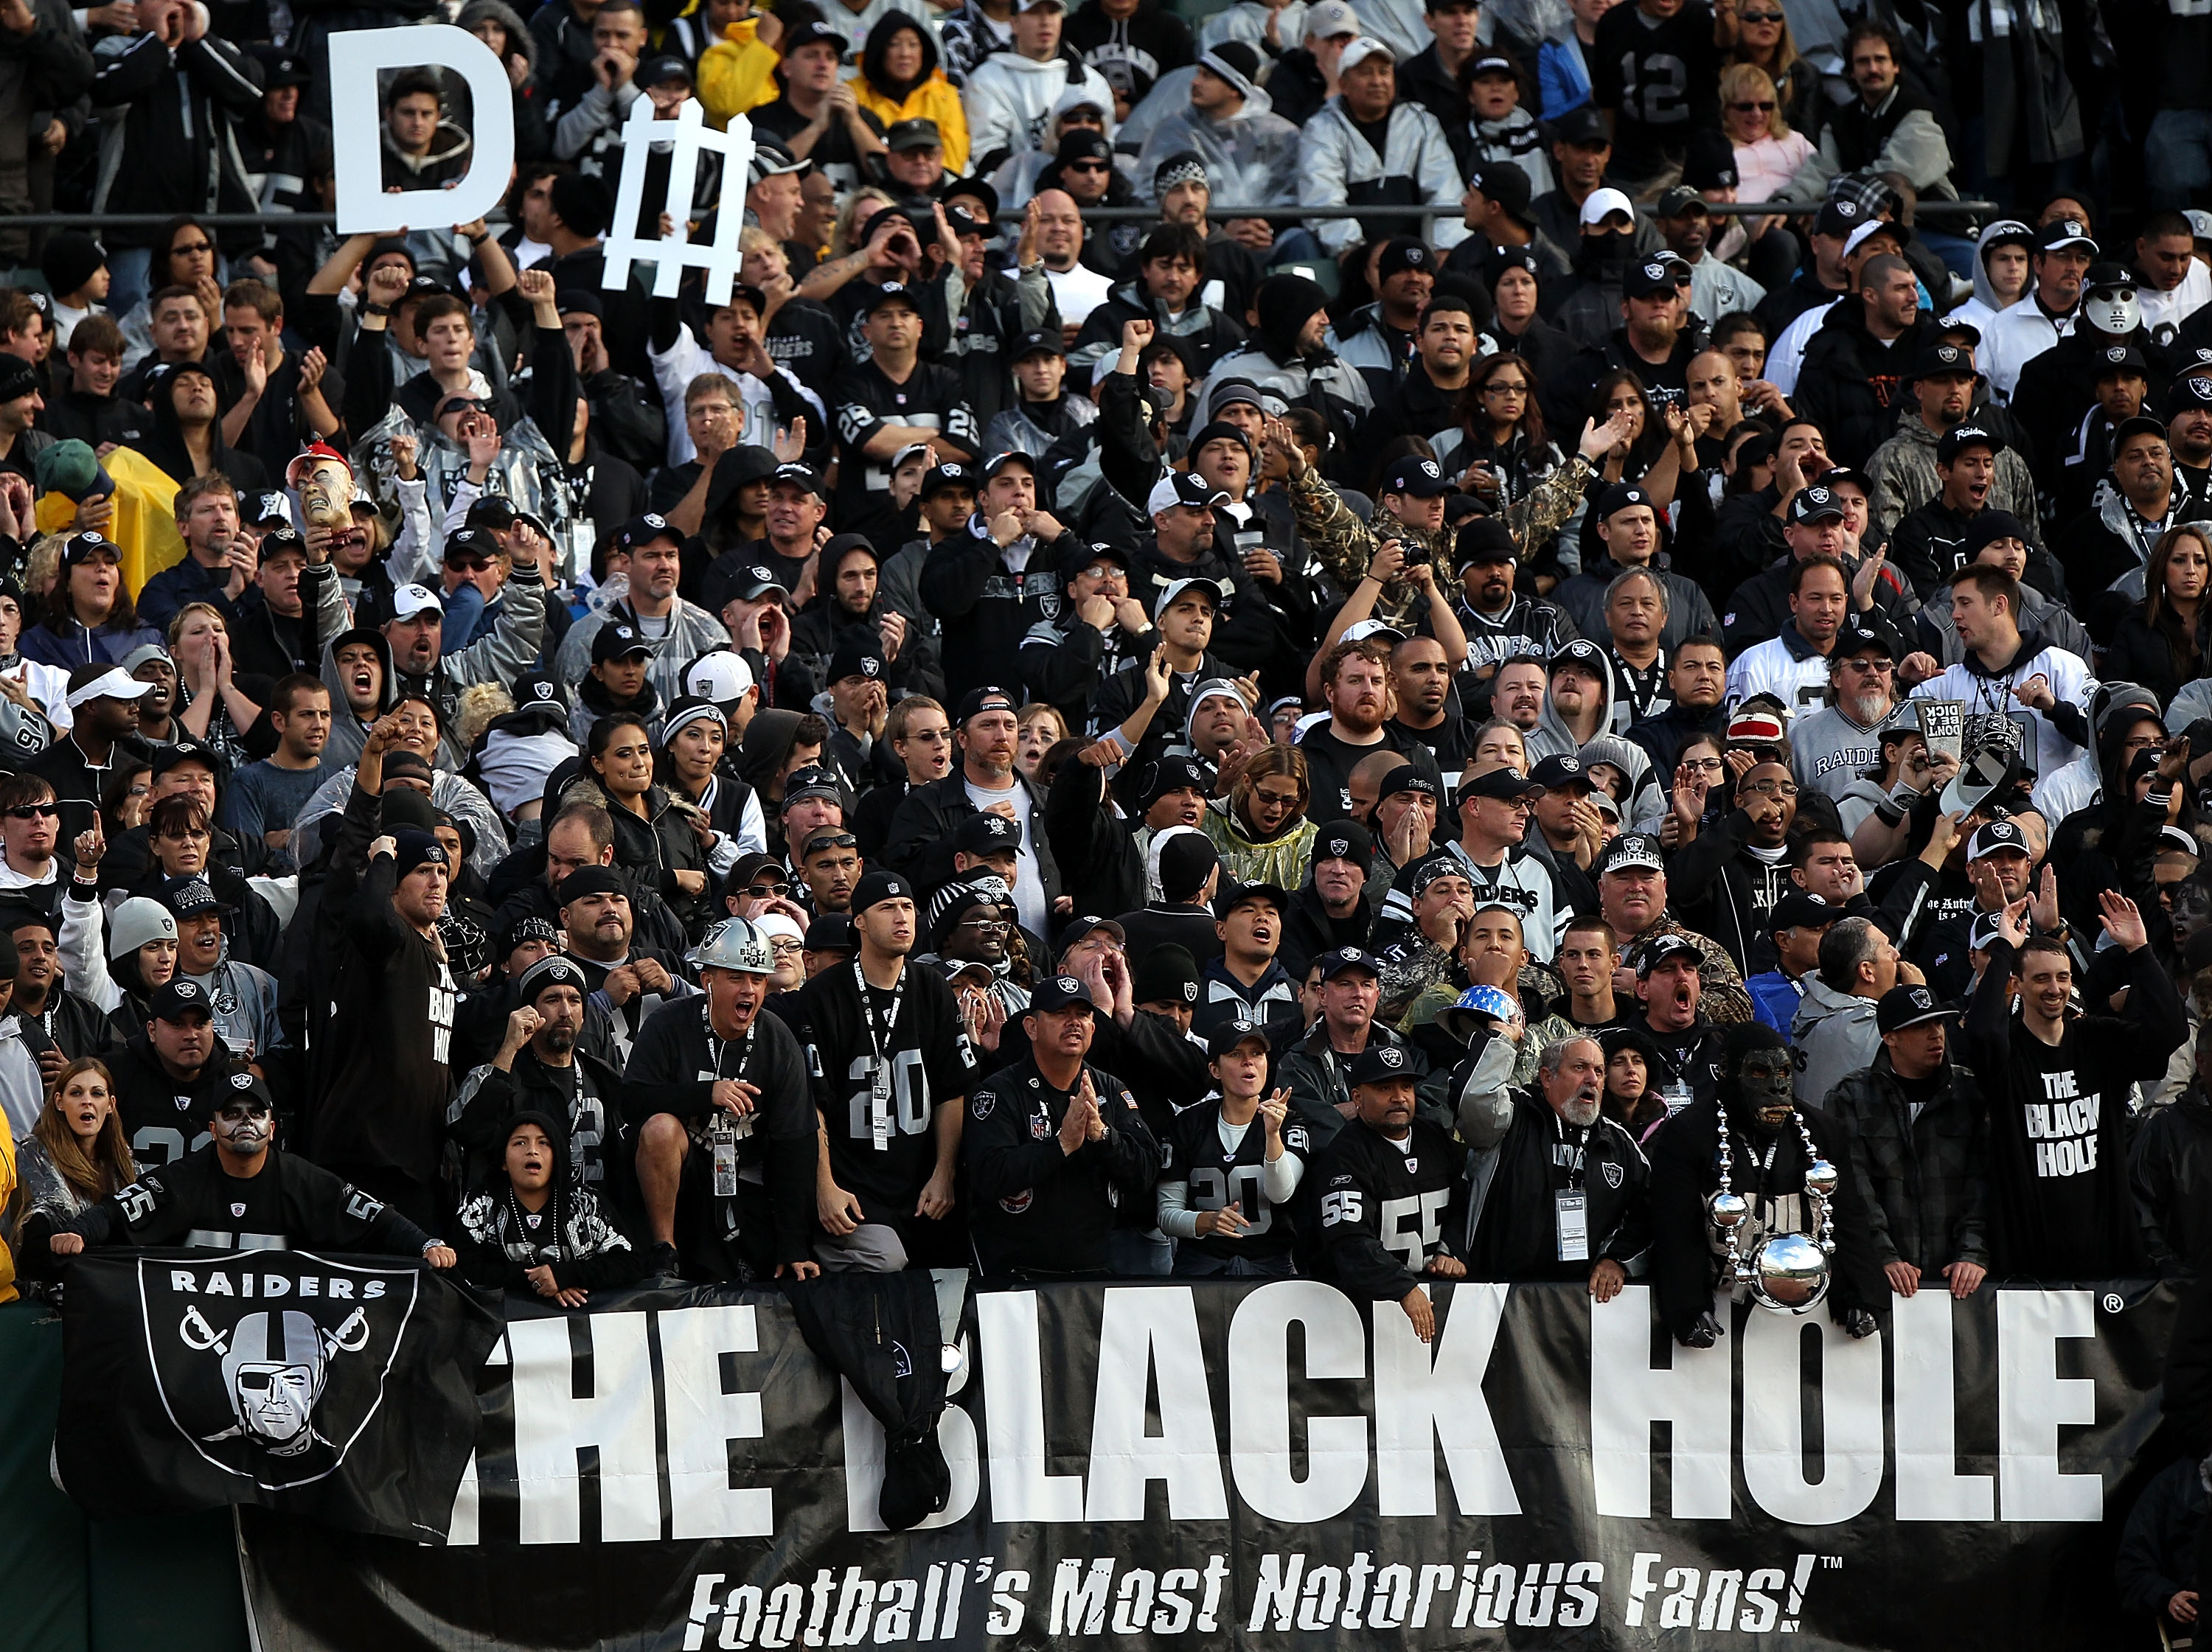 OAKLAND, CA - NOVEMBER 07: Fans of the Oakland Raiders look on against of the Kansas City Chiefs during an NFL game at Oakland-Alameda County Coliseum on November 7, 2010 in Oakland, California.  (Photo by Jed Jacobsohn/Getty Images)